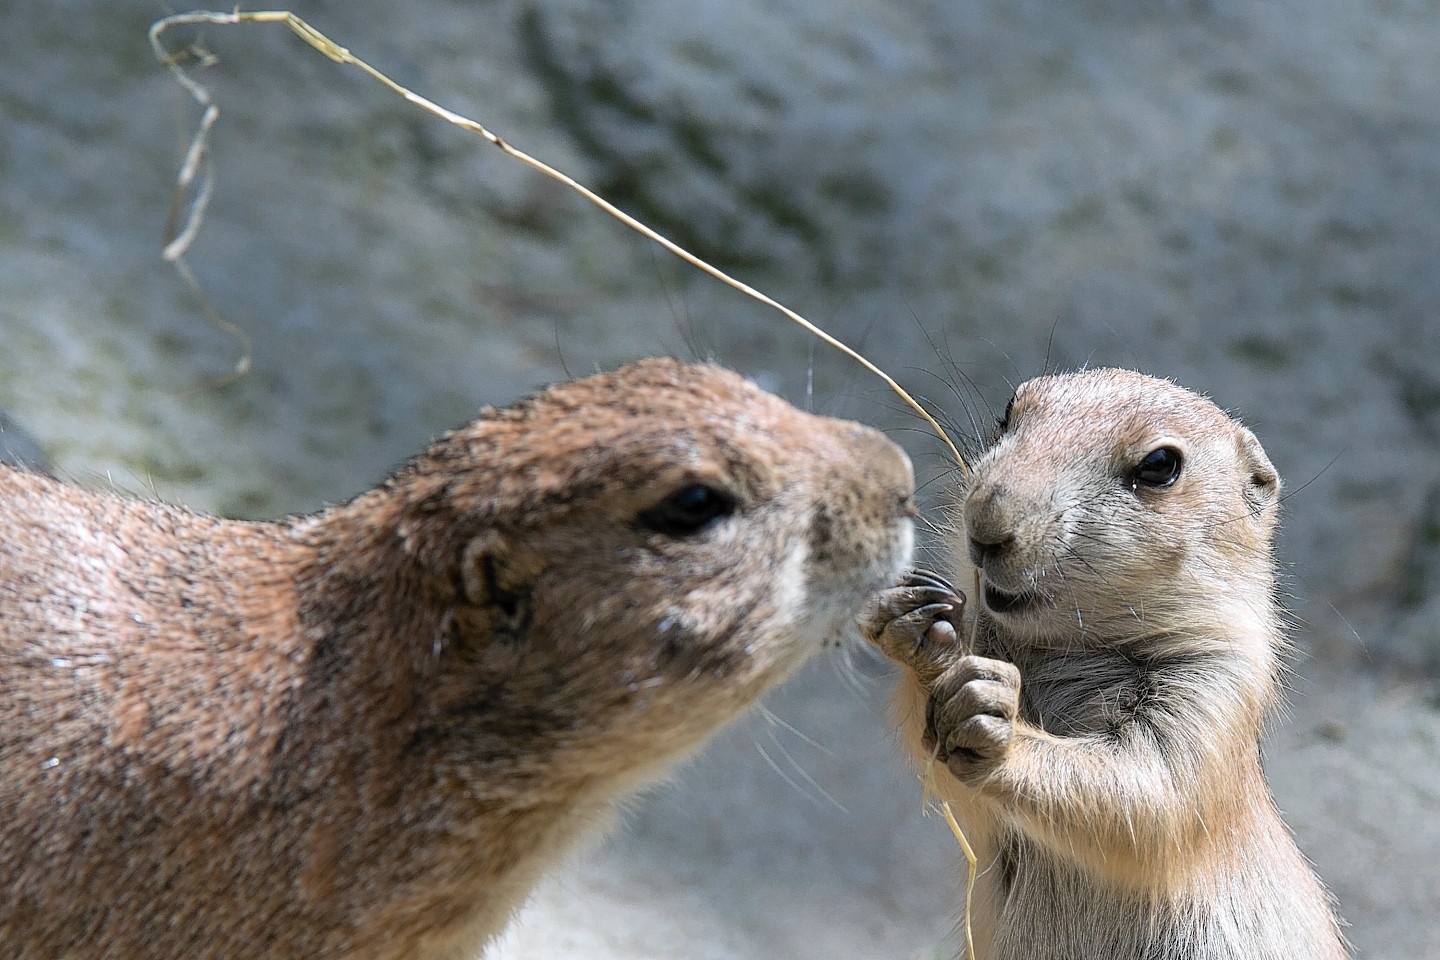 A prairie dog offspring and a parent play in their enclosure at the zoo in Hanover, Germany